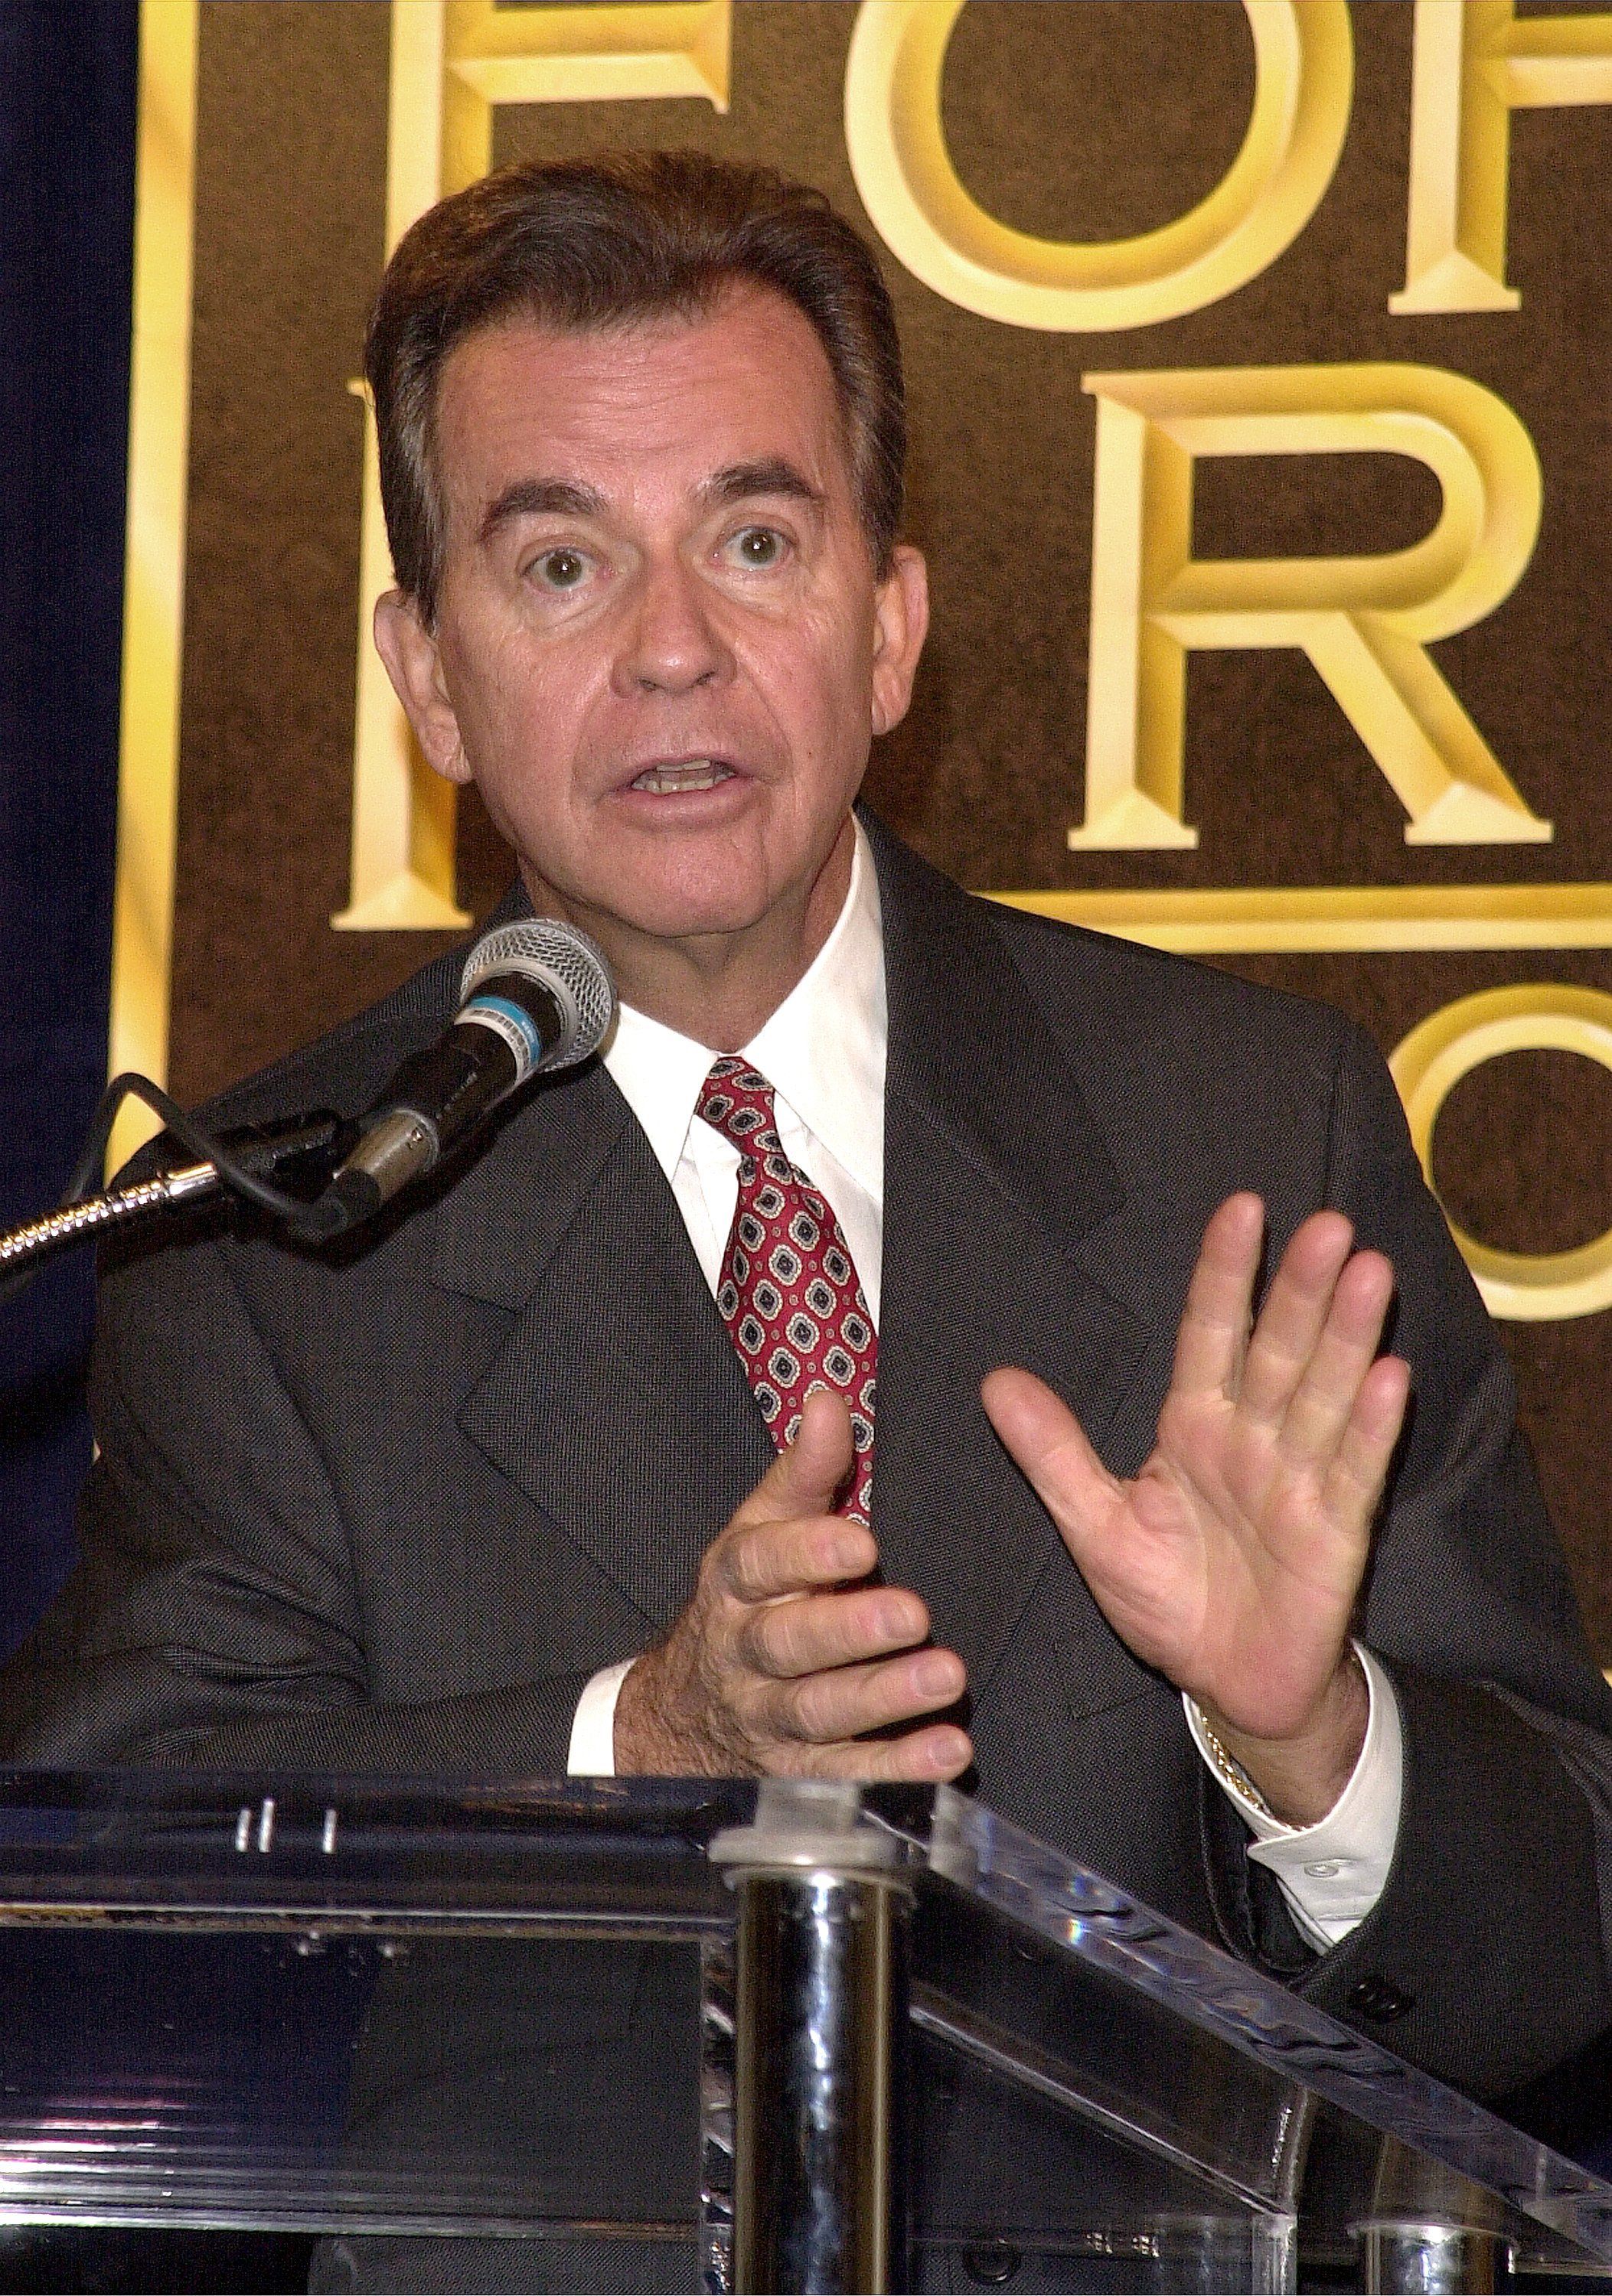 Dick Clark looks surprised with his hands preparing to clap.